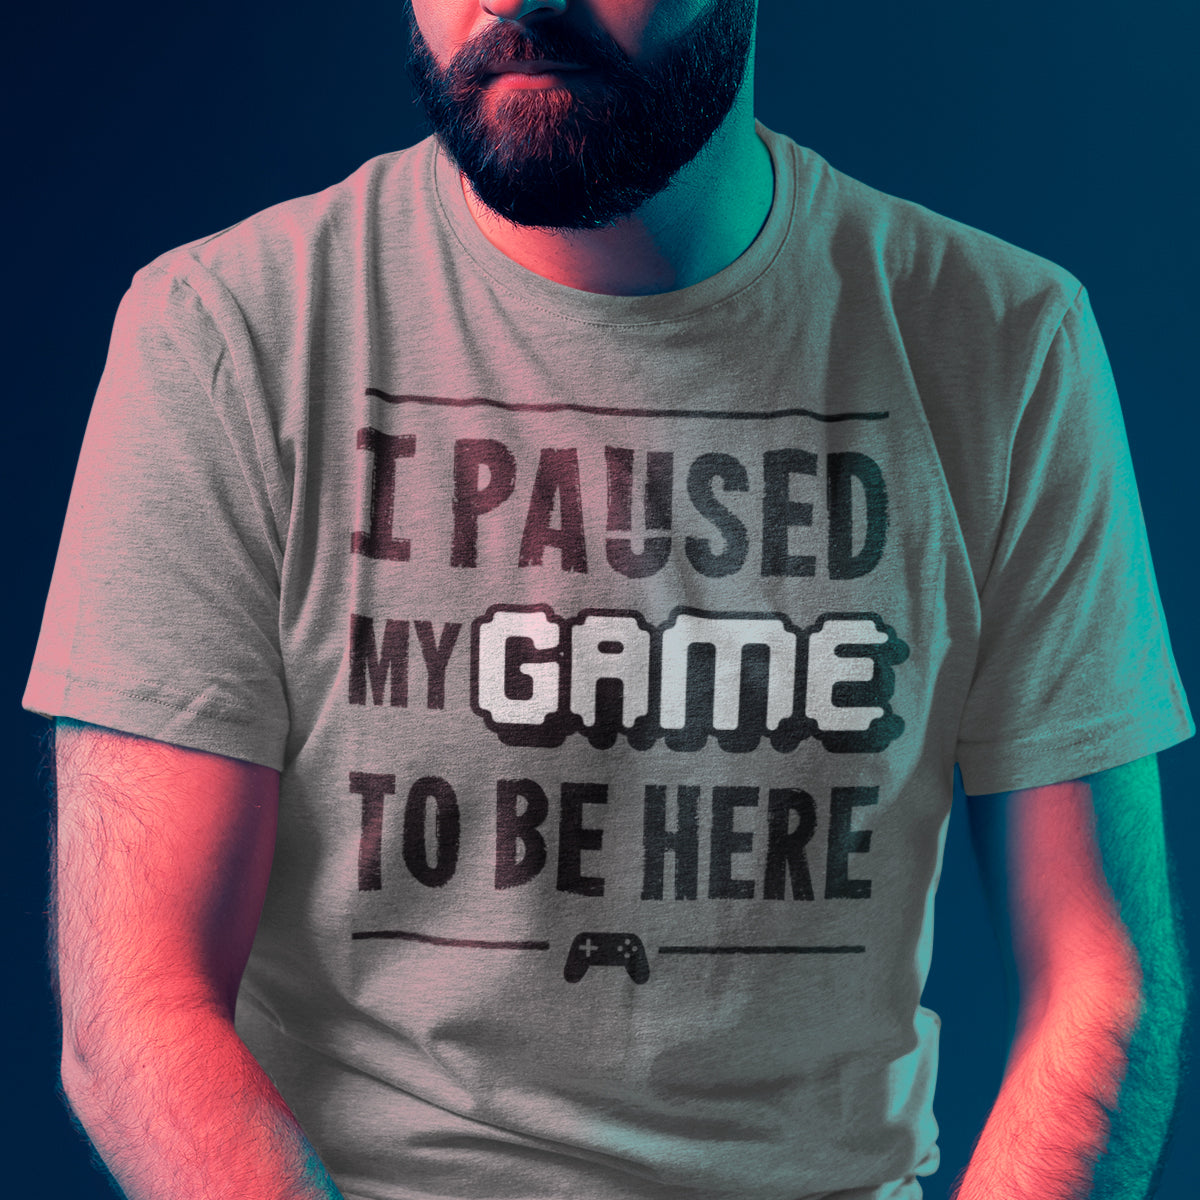 I Paused My Game to be here Shirt